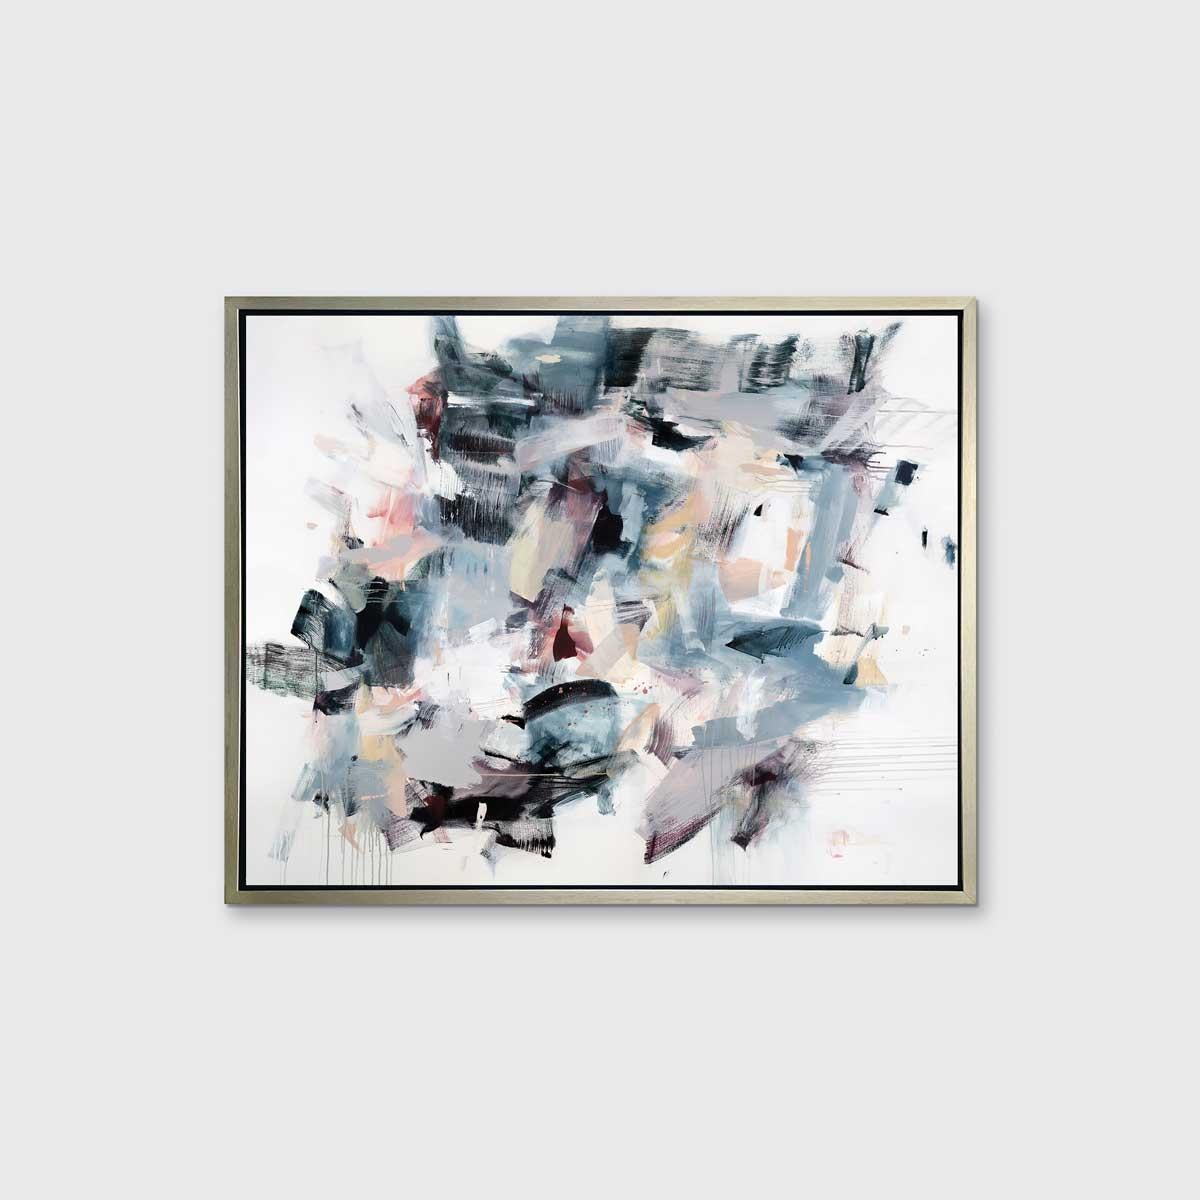 This limited edition abstract giclee print by Kelly Rossetti features layers of light, loose strokes  of pale creme and pink over top of a range of blues, with pops of a unique green color accenting the lower portion of the composition. The result